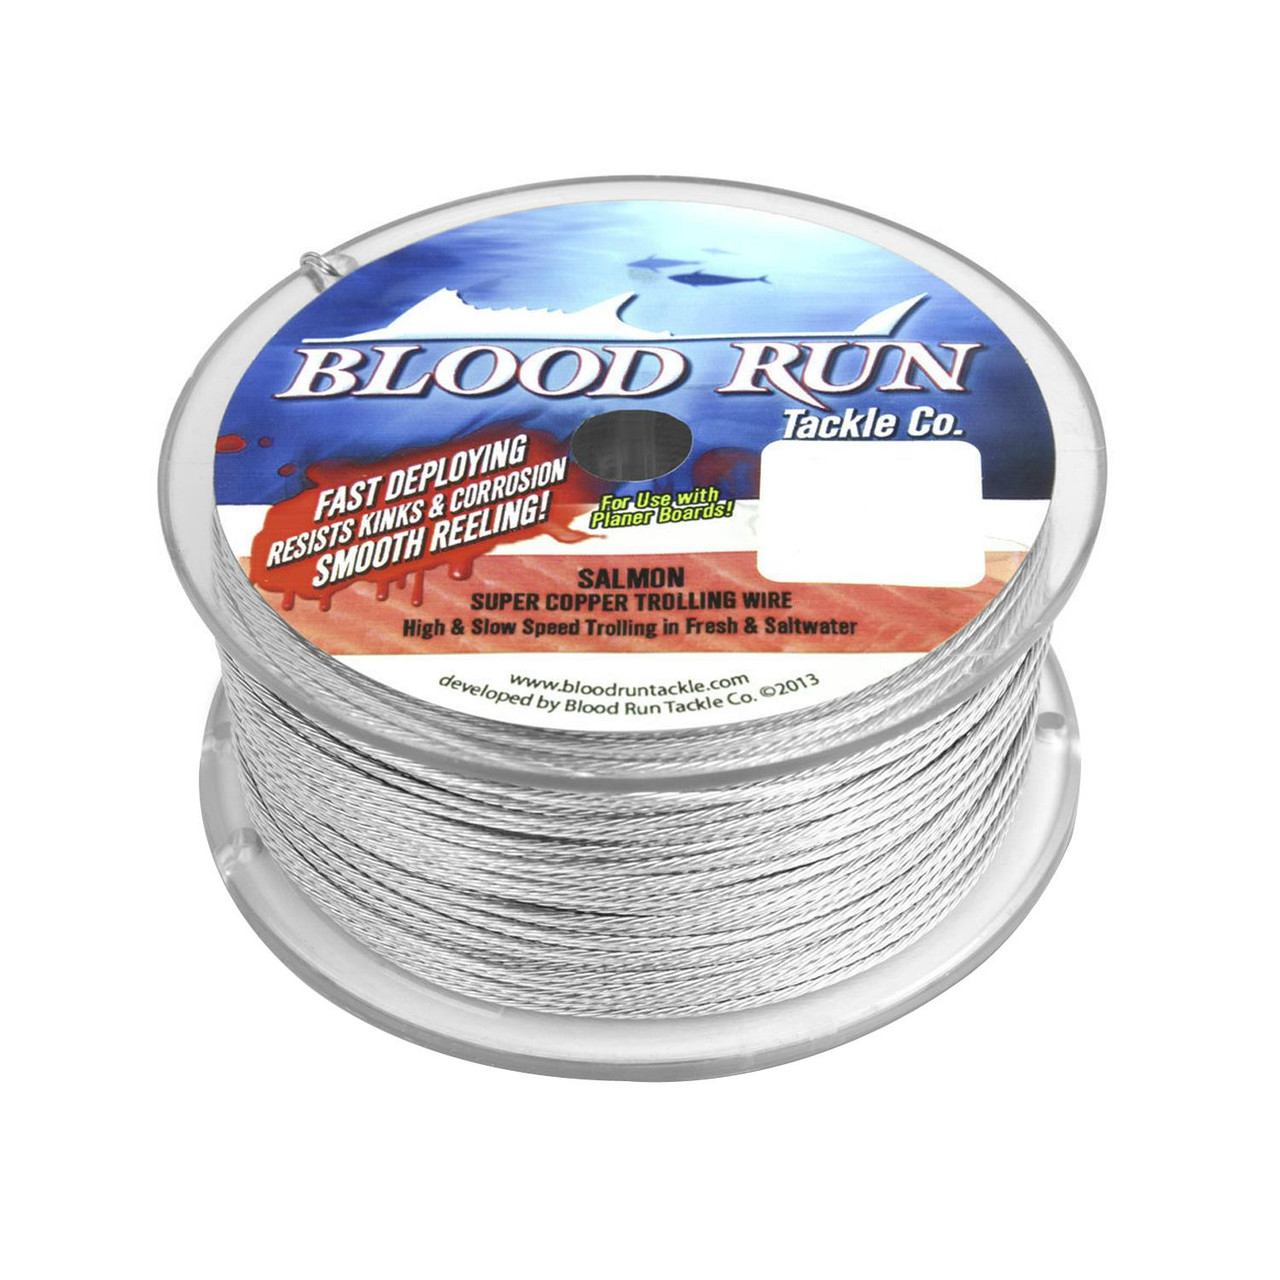  Blood Run Fishing 45lb Test Copper Fishing Line Trolling Wire  300 Feet : Lead Core And Wire Fishing Line : Sports & Outdoors